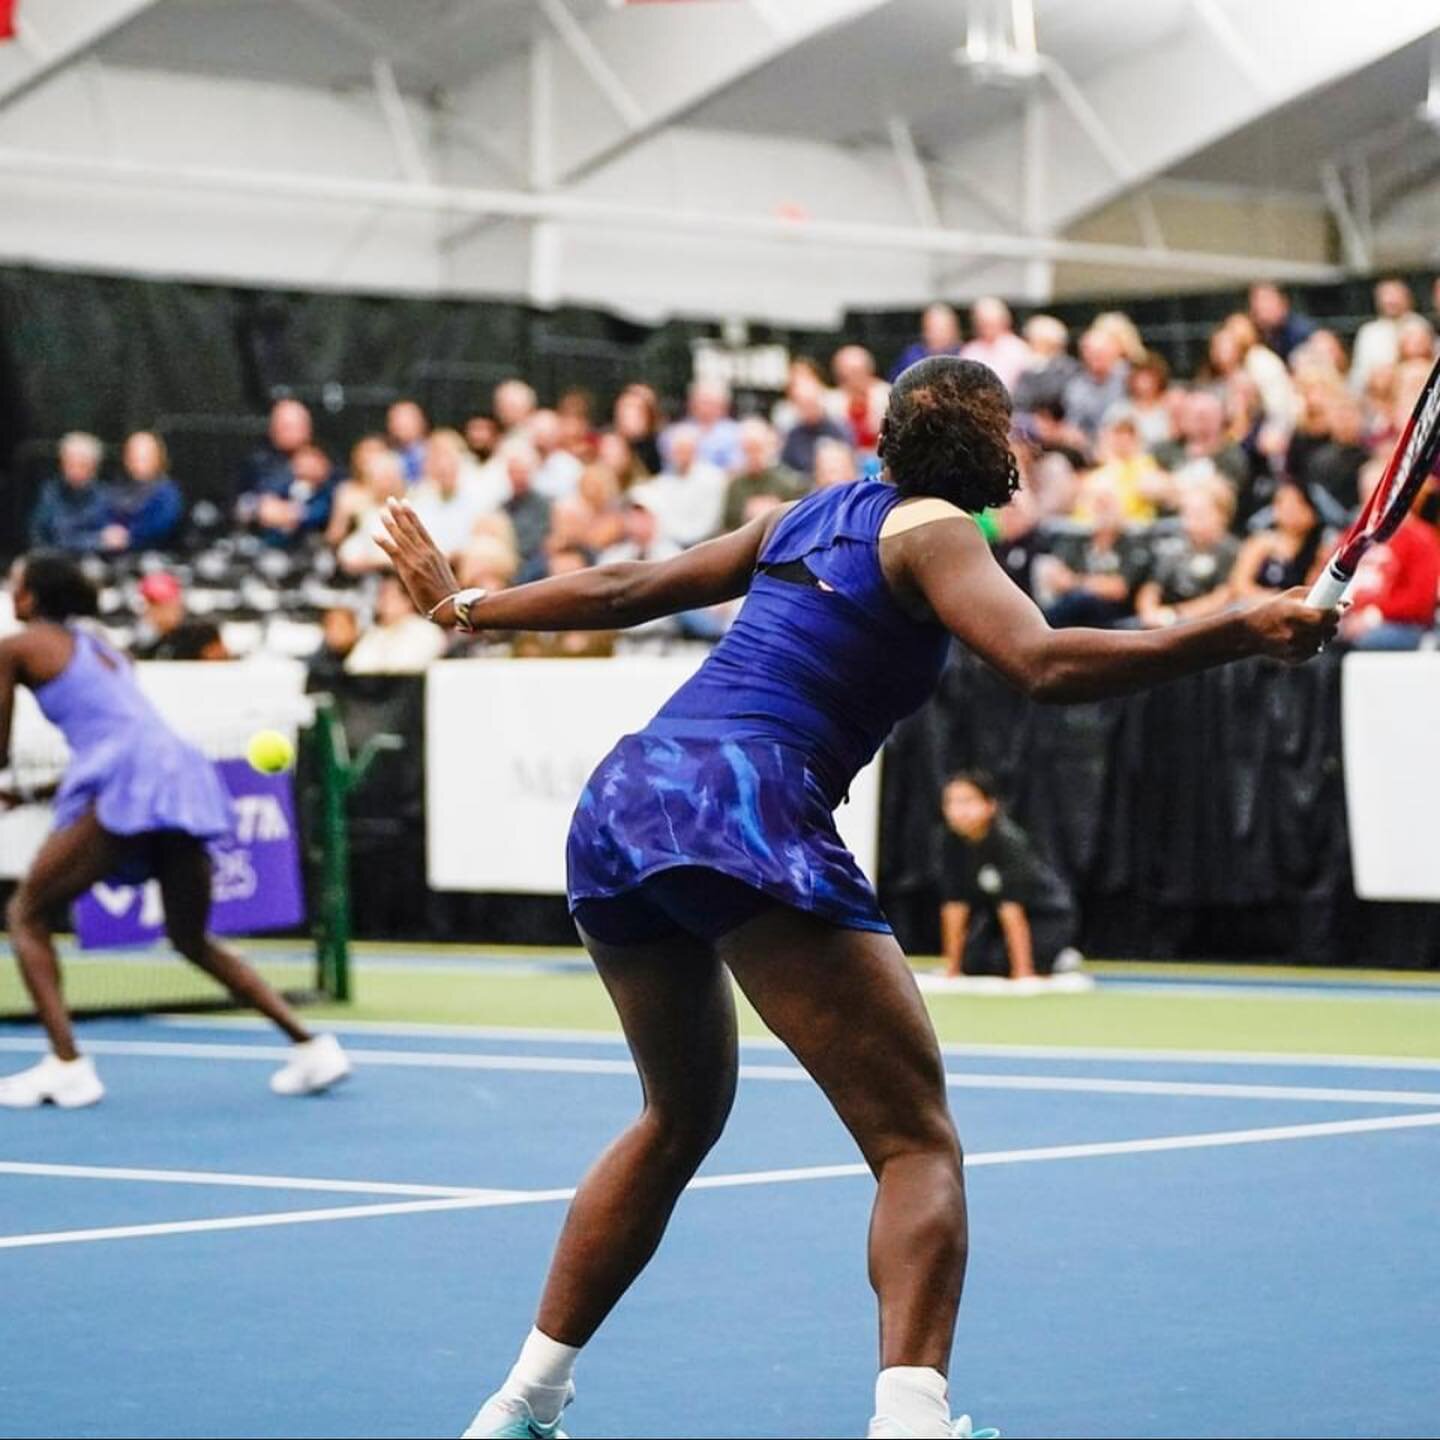 Introducing your 2022 Dow Tennis Classic Doubles Champions Asia Muhammad and Alycia Parks! Muhammad/Parks went 6-2 and 6-3 against Anna-Lena Friedsam and Nadiia Kichenok. 

Tomorrow is the last day of the 34th annual Dow Tennis Classic. Come out and 